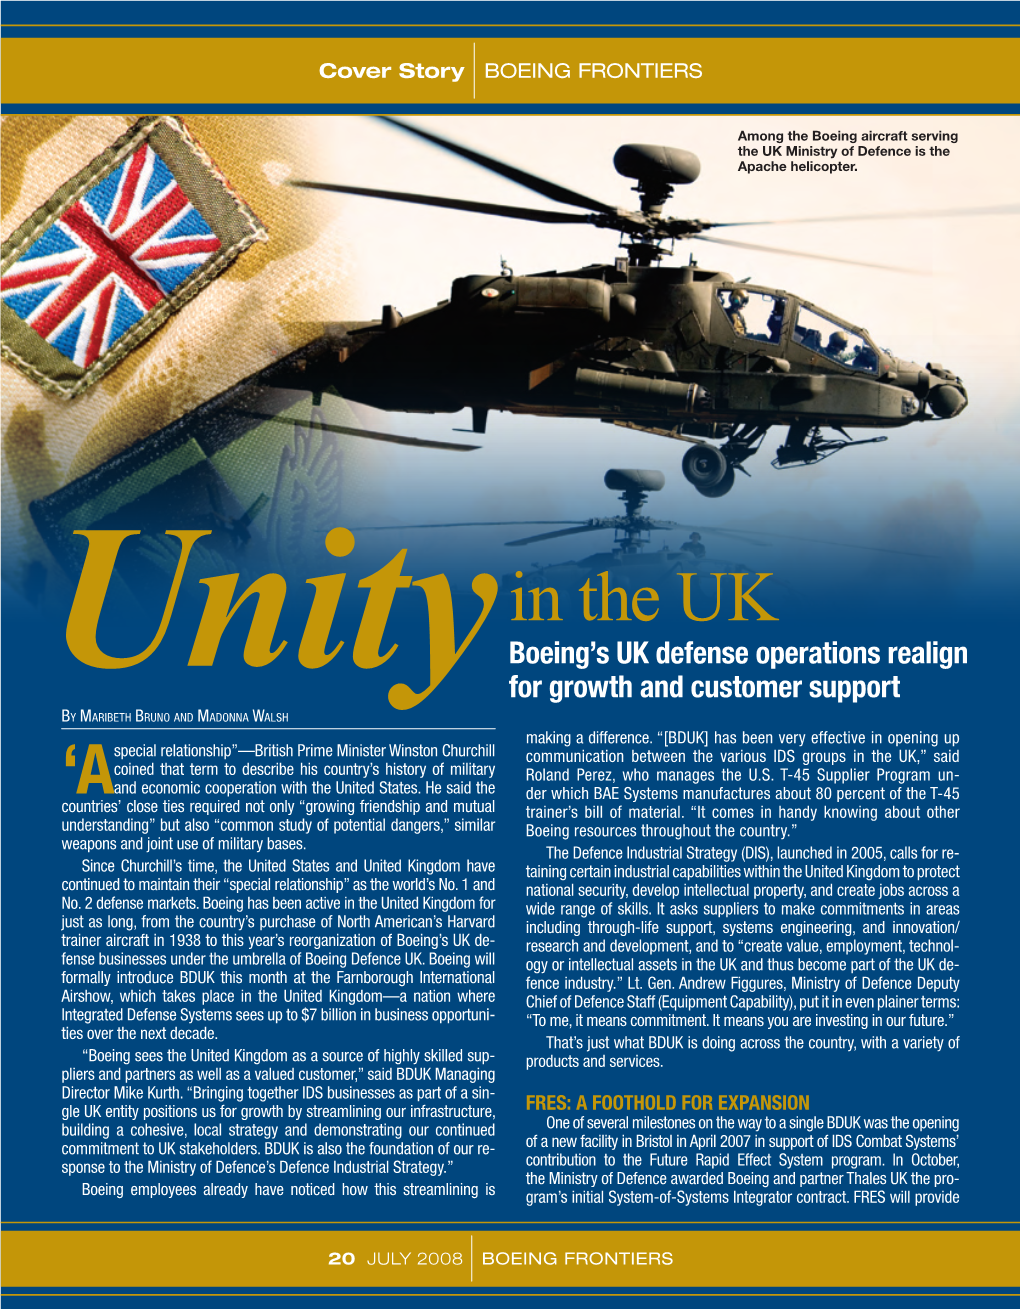 In the UK Boeing’S UK Defense Operations Realign Unity for Growth and Customer Support by Ma R I B E T H Br U N O a N D Ma D O N N a Wa L S H Making a Difference